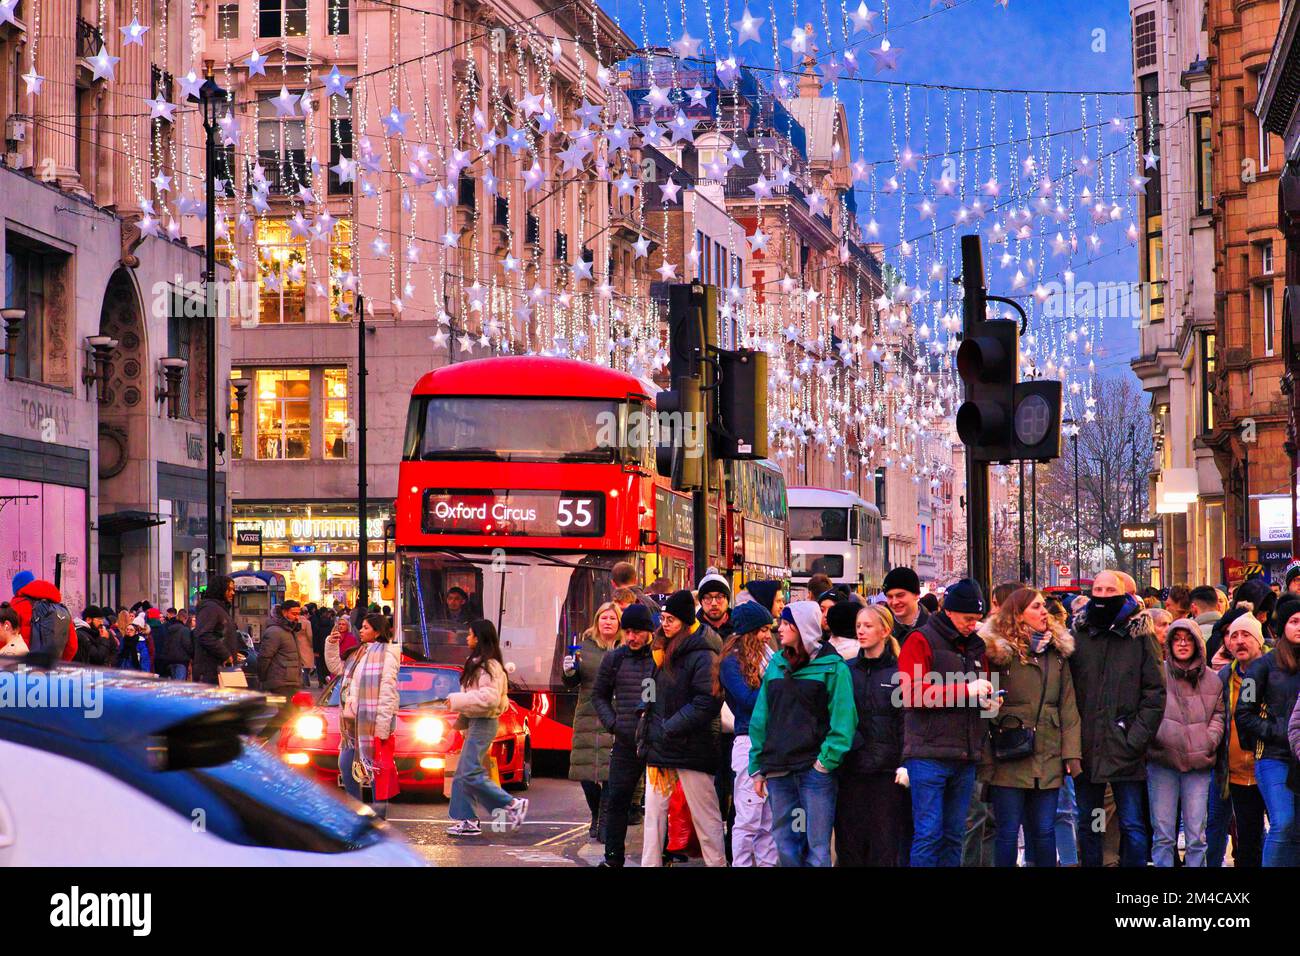 Oxford Circus, Oxford Street, London - Crowds of shoppers beneath the Christmas lights waiting to cross the road with red bus and other traffic Stock Photo